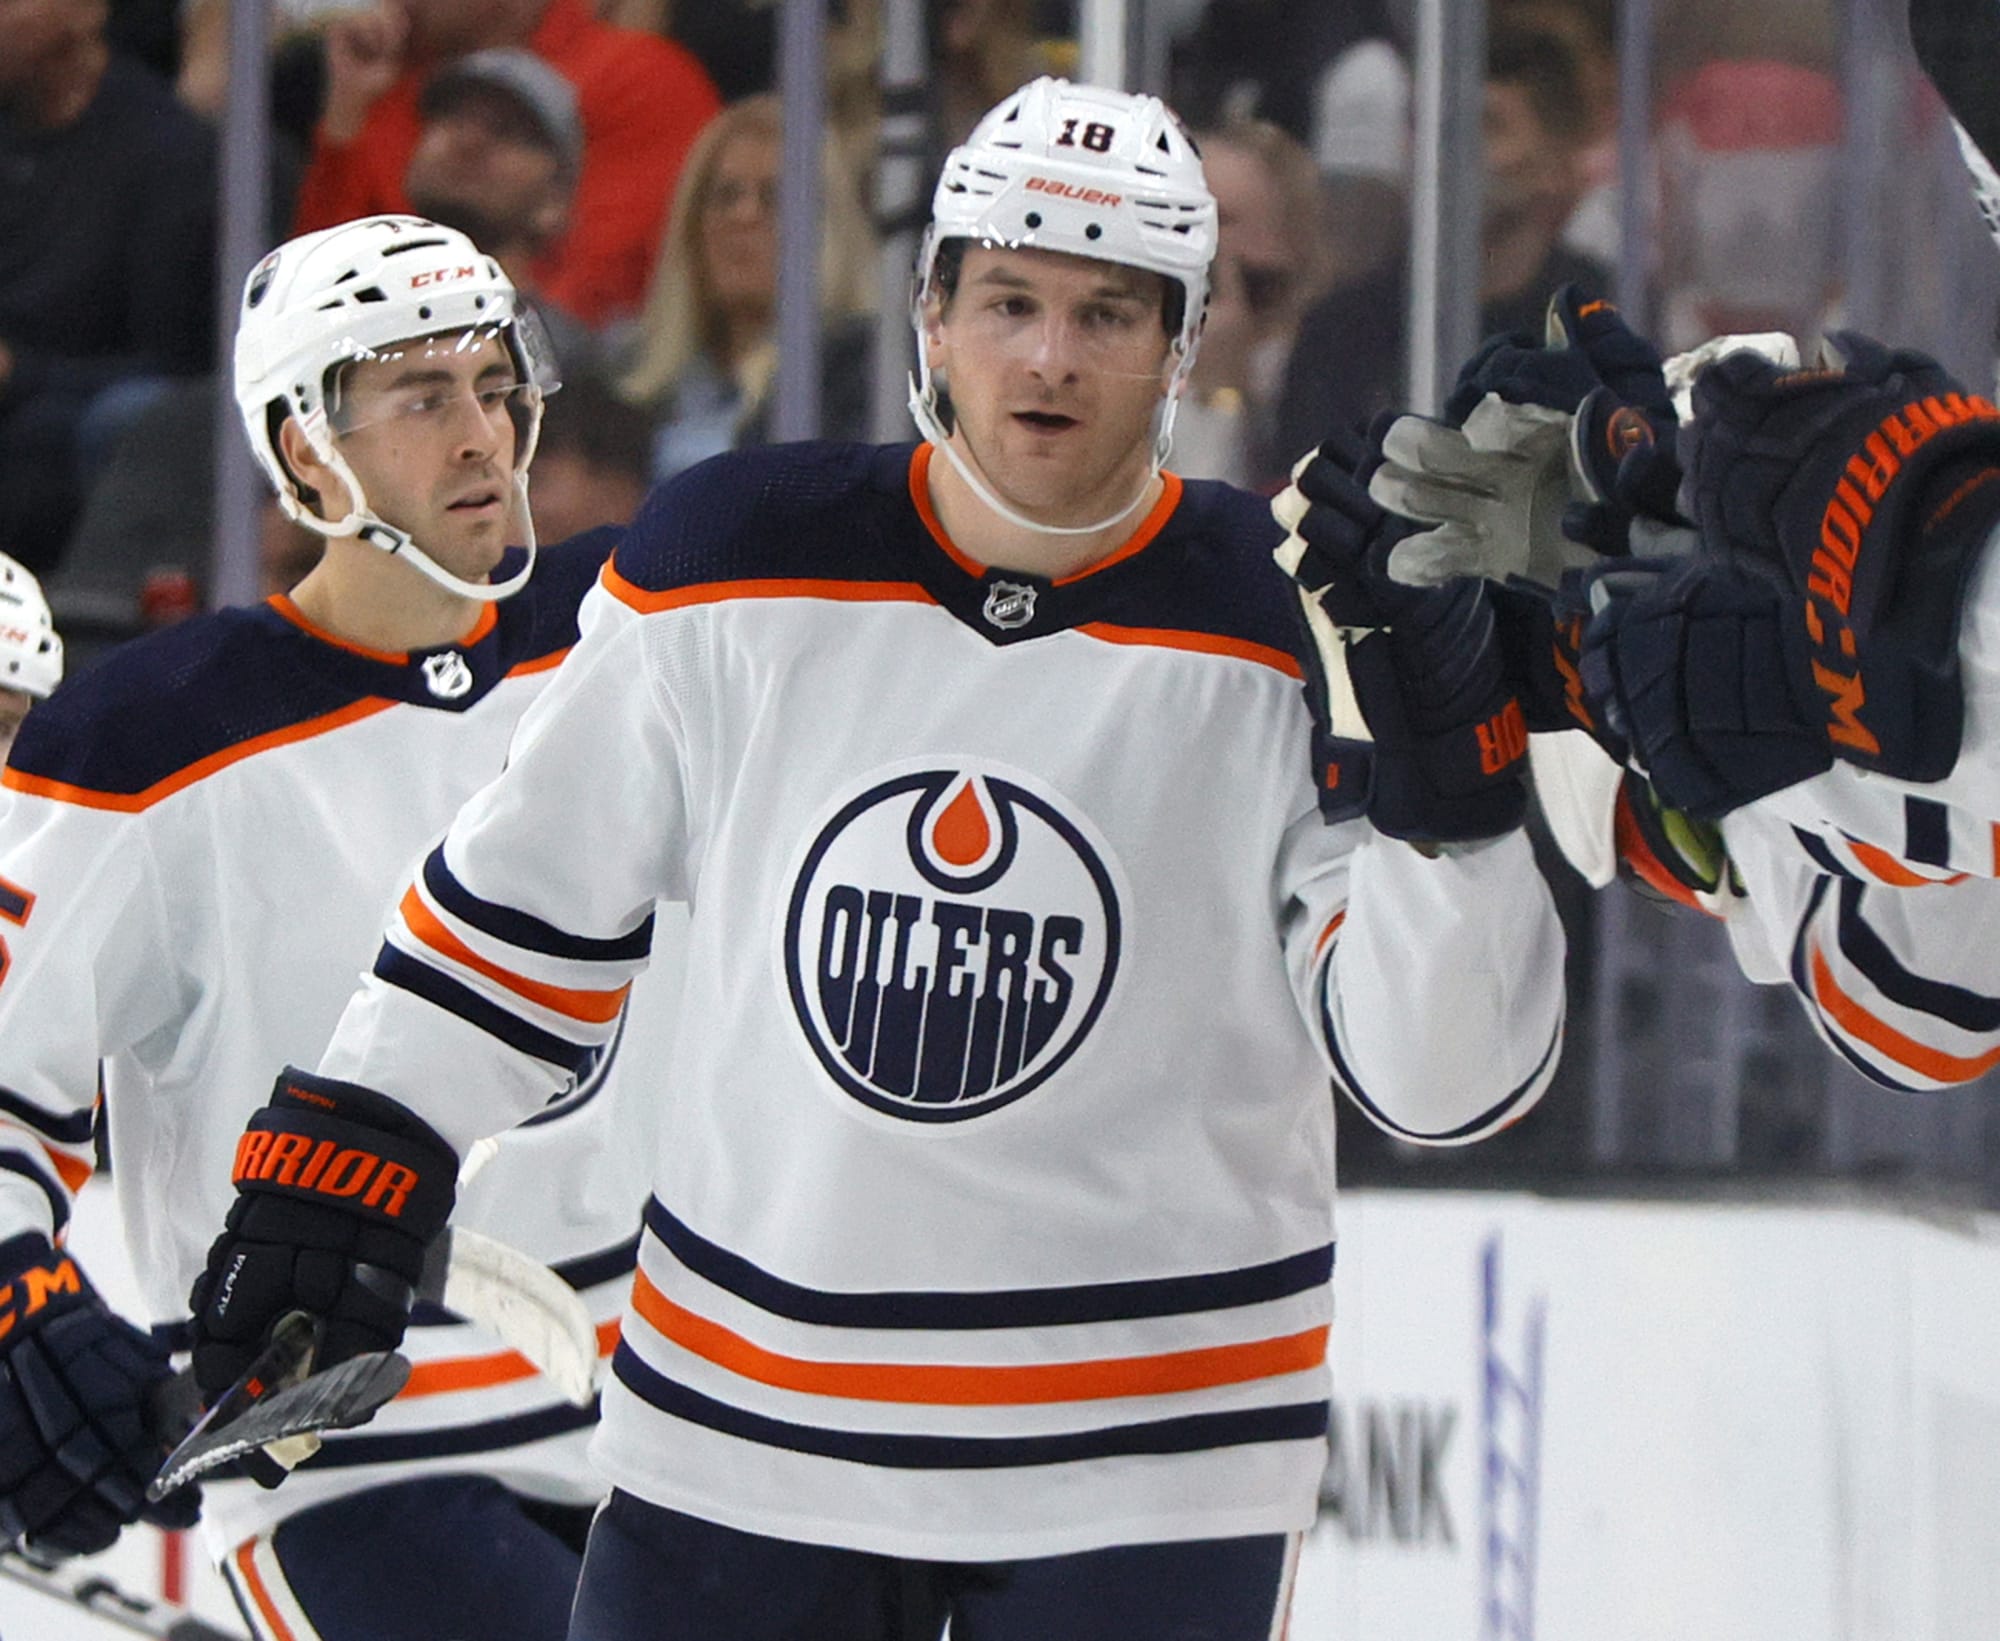 Connor McDavid racks up 5 points in Oilers' win over Leafs